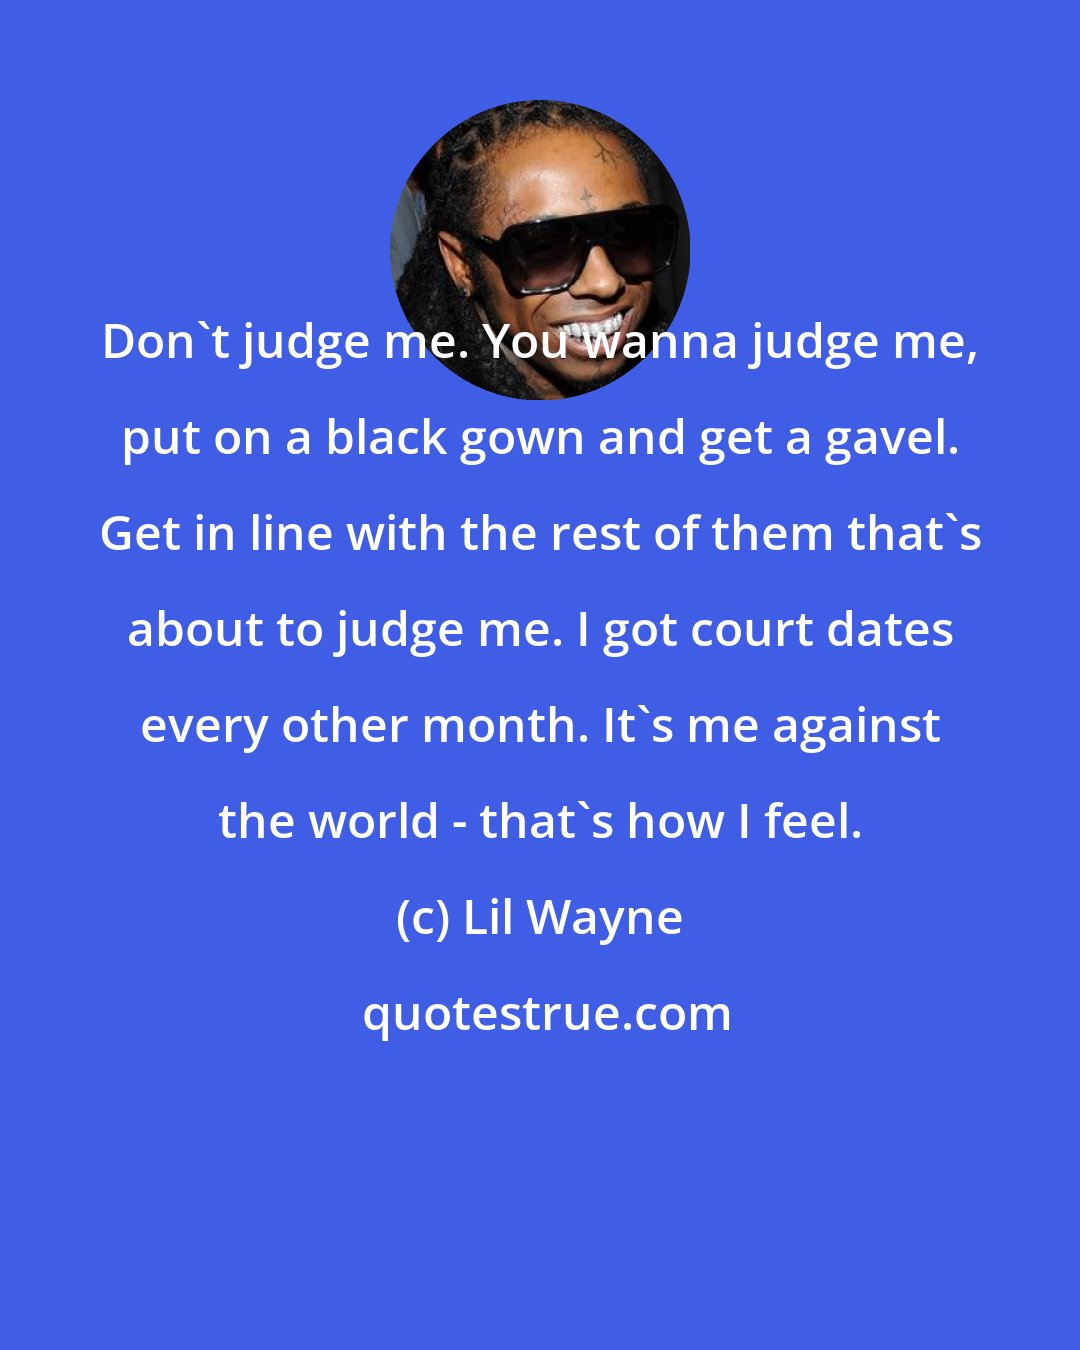 Lil Wayne: Don't judge me. You wanna judge me, put on a black gown and get a gavel. Get in line with the rest of them that's about to judge me. I got court dates every other month. It's me against the world - that's how I feel.